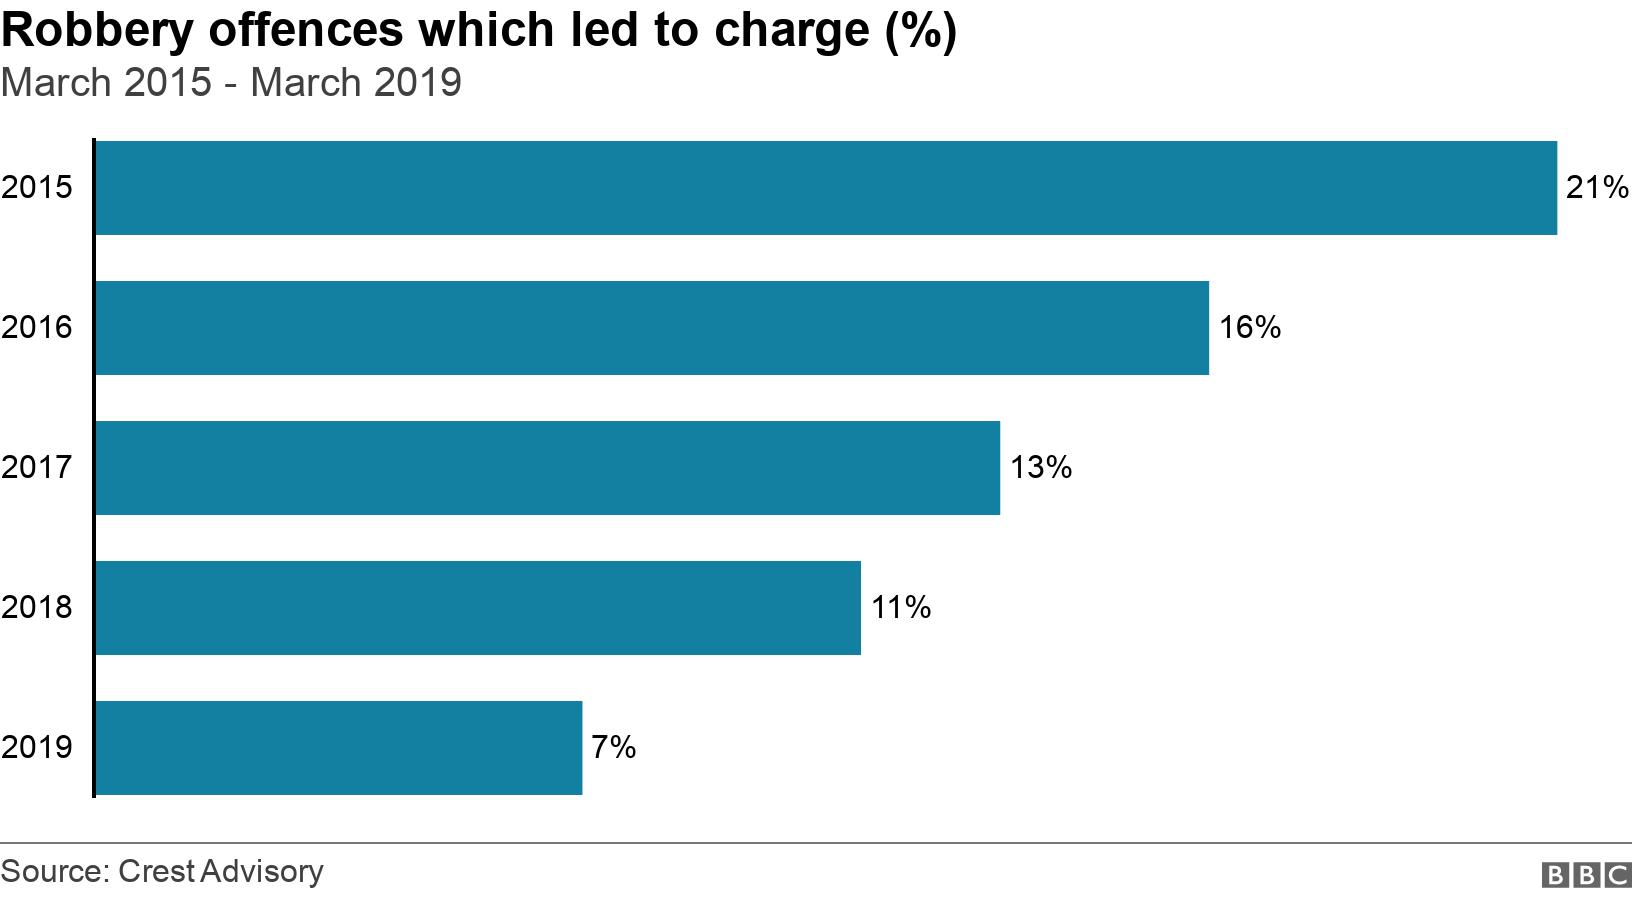 Robbery offences which led to charge (%). March 2015 - March 2019. The number of robbery offences which led to charges in percentage terms .